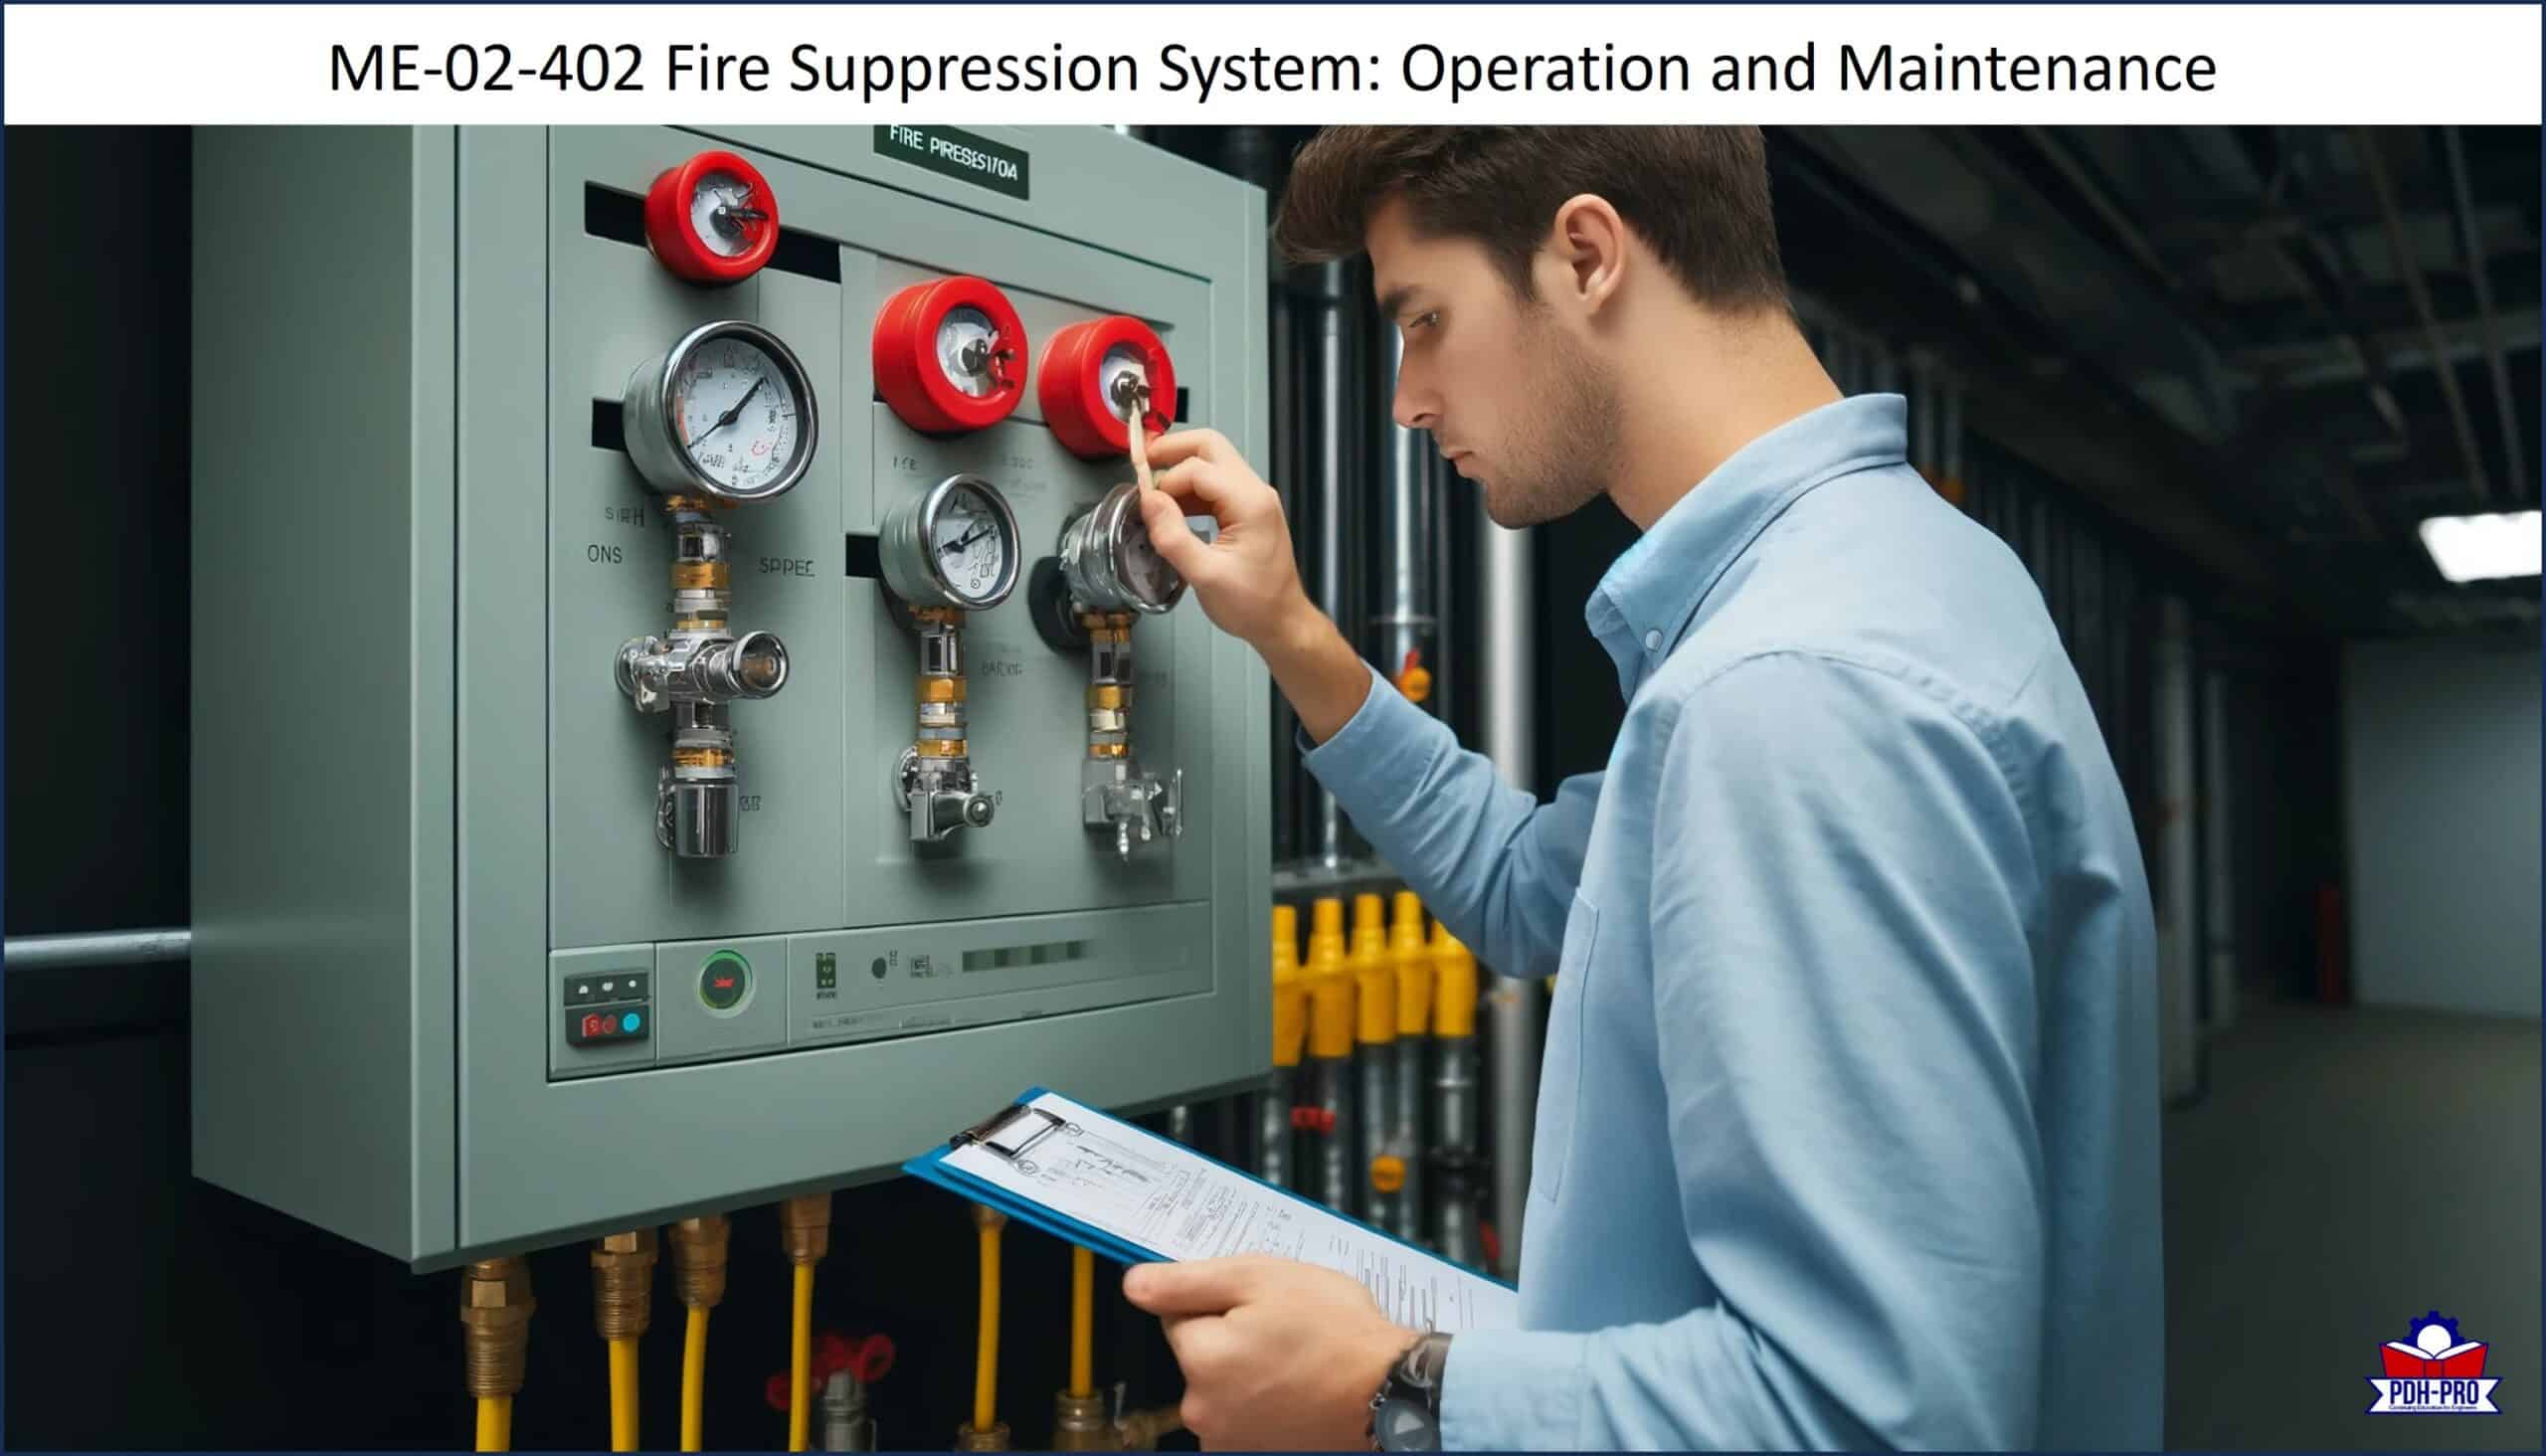 Fire Suppression System: Operation and Maintenance